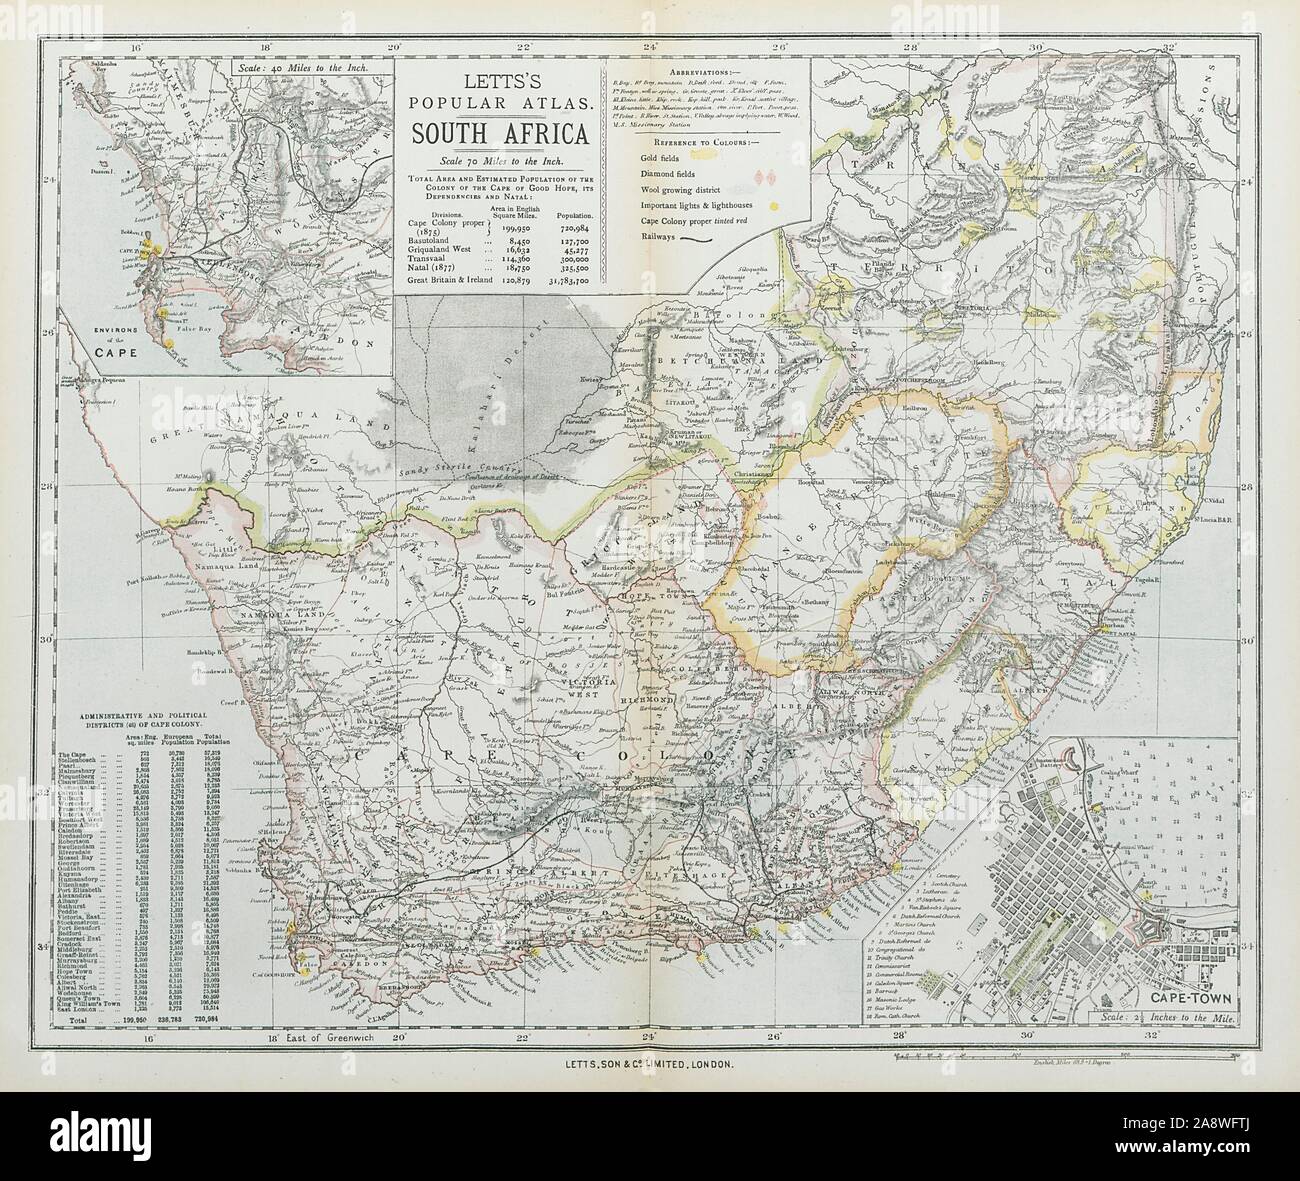 SOUTH AFRICA & CAPE TOWN CITY PLAN Cape Colony Orange Free State. 1883 map Stock Photo Alamy